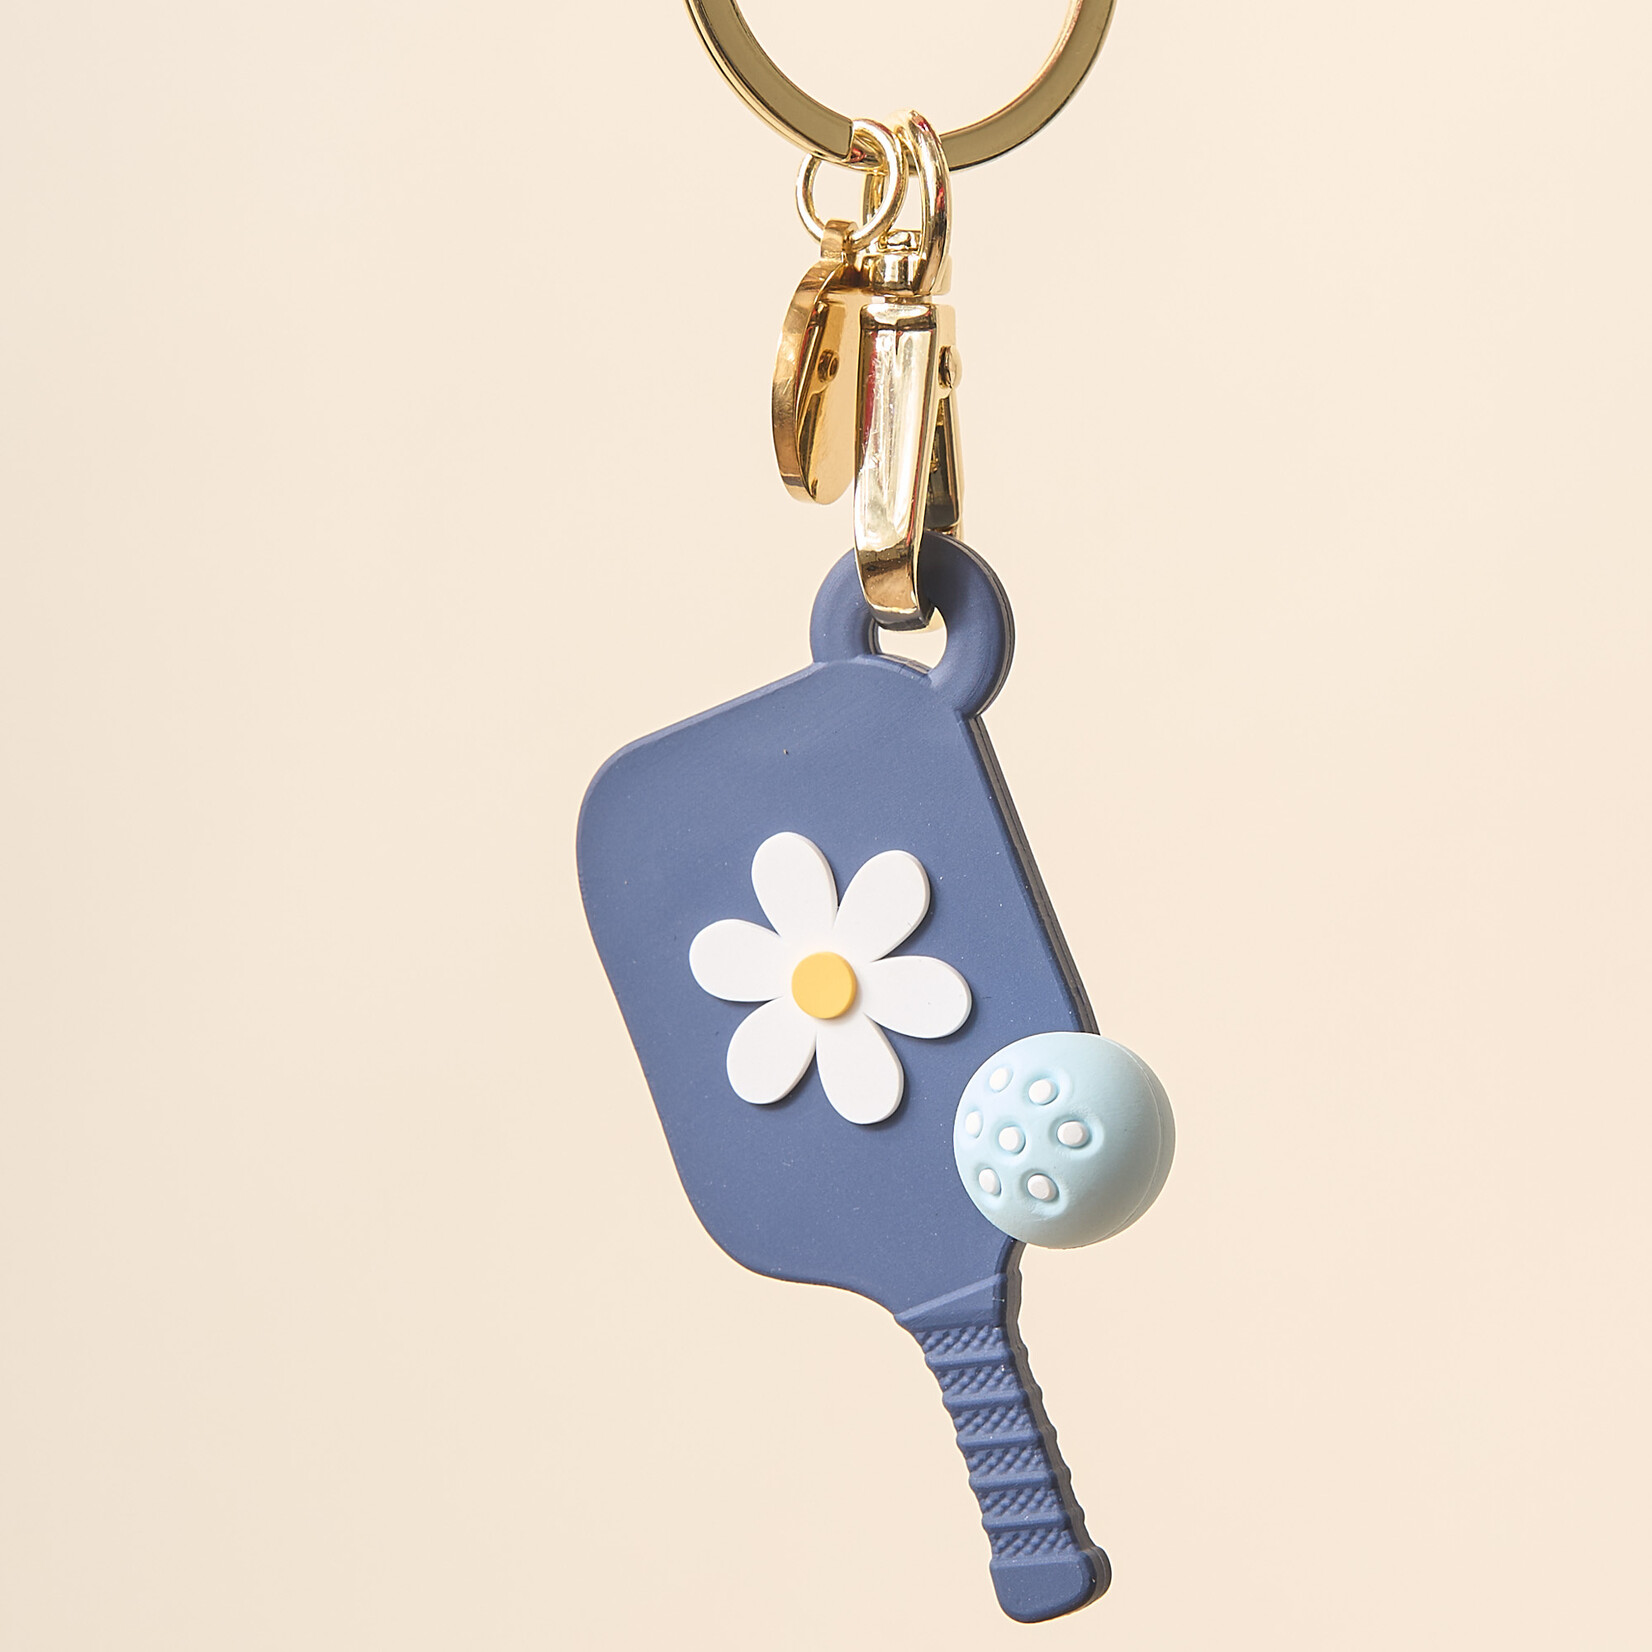 The Darling Effect The Darling Effect - Pickleball Paddle Keychain